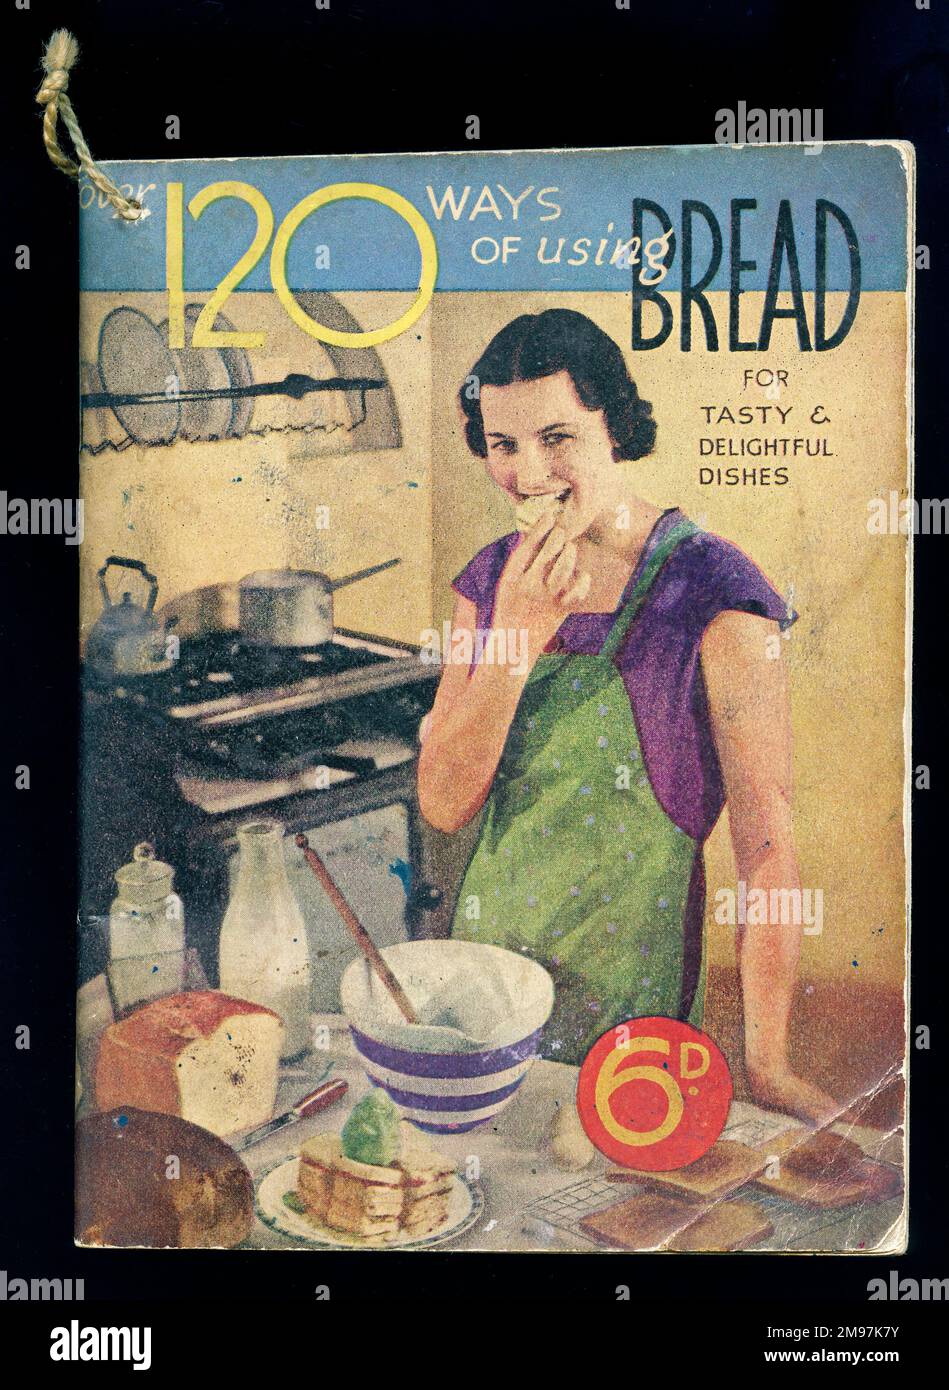 Cover design, Over 120 Ways of Using Bread for tasty and delightful dishes. Showing a woman in her kitchen, enjoying some of the results of her baking. Stock Photo